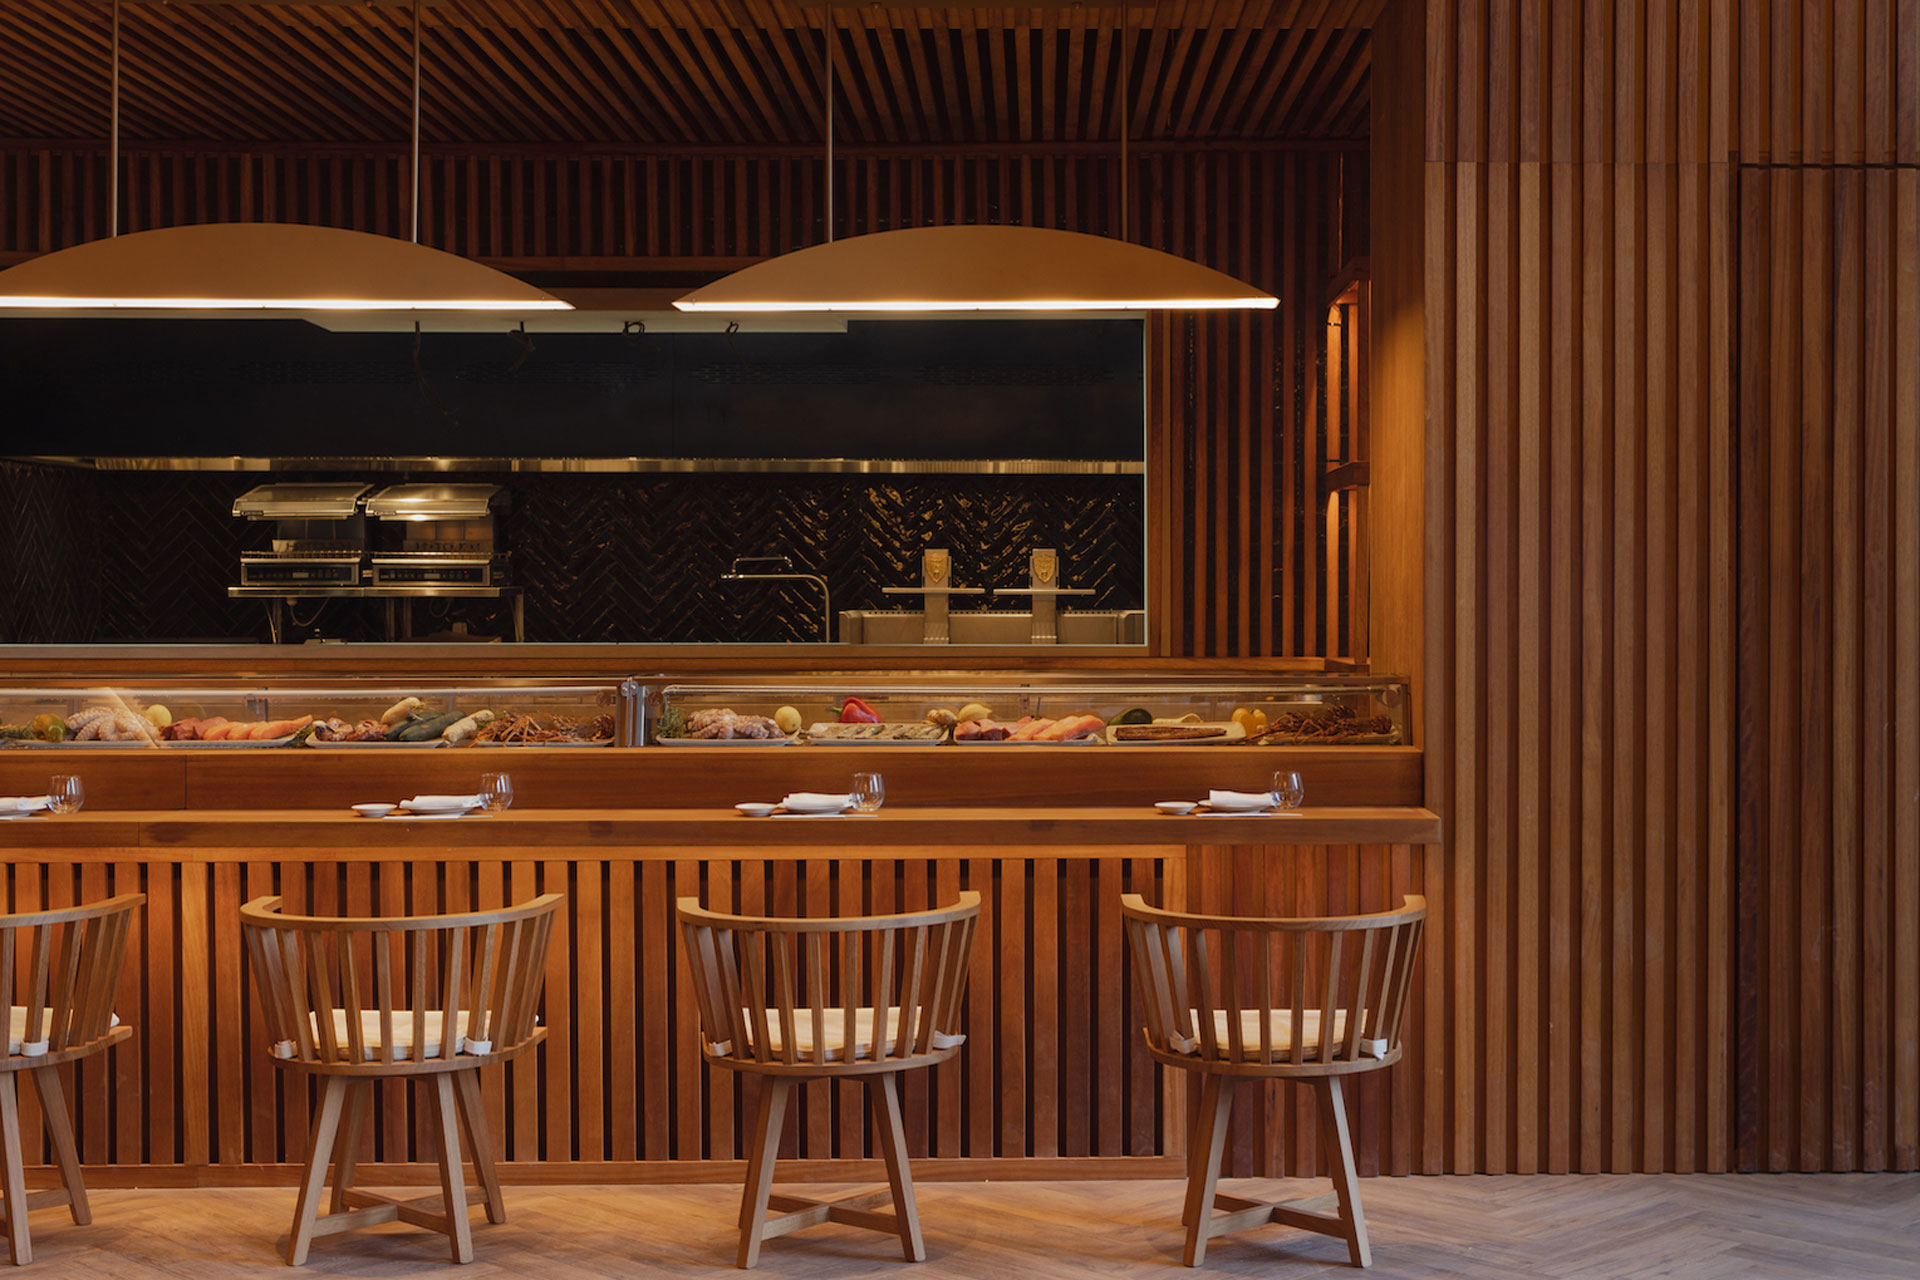 Restaurant at Nobu Hotel Marrakech, with bar stools and wooden panelling.